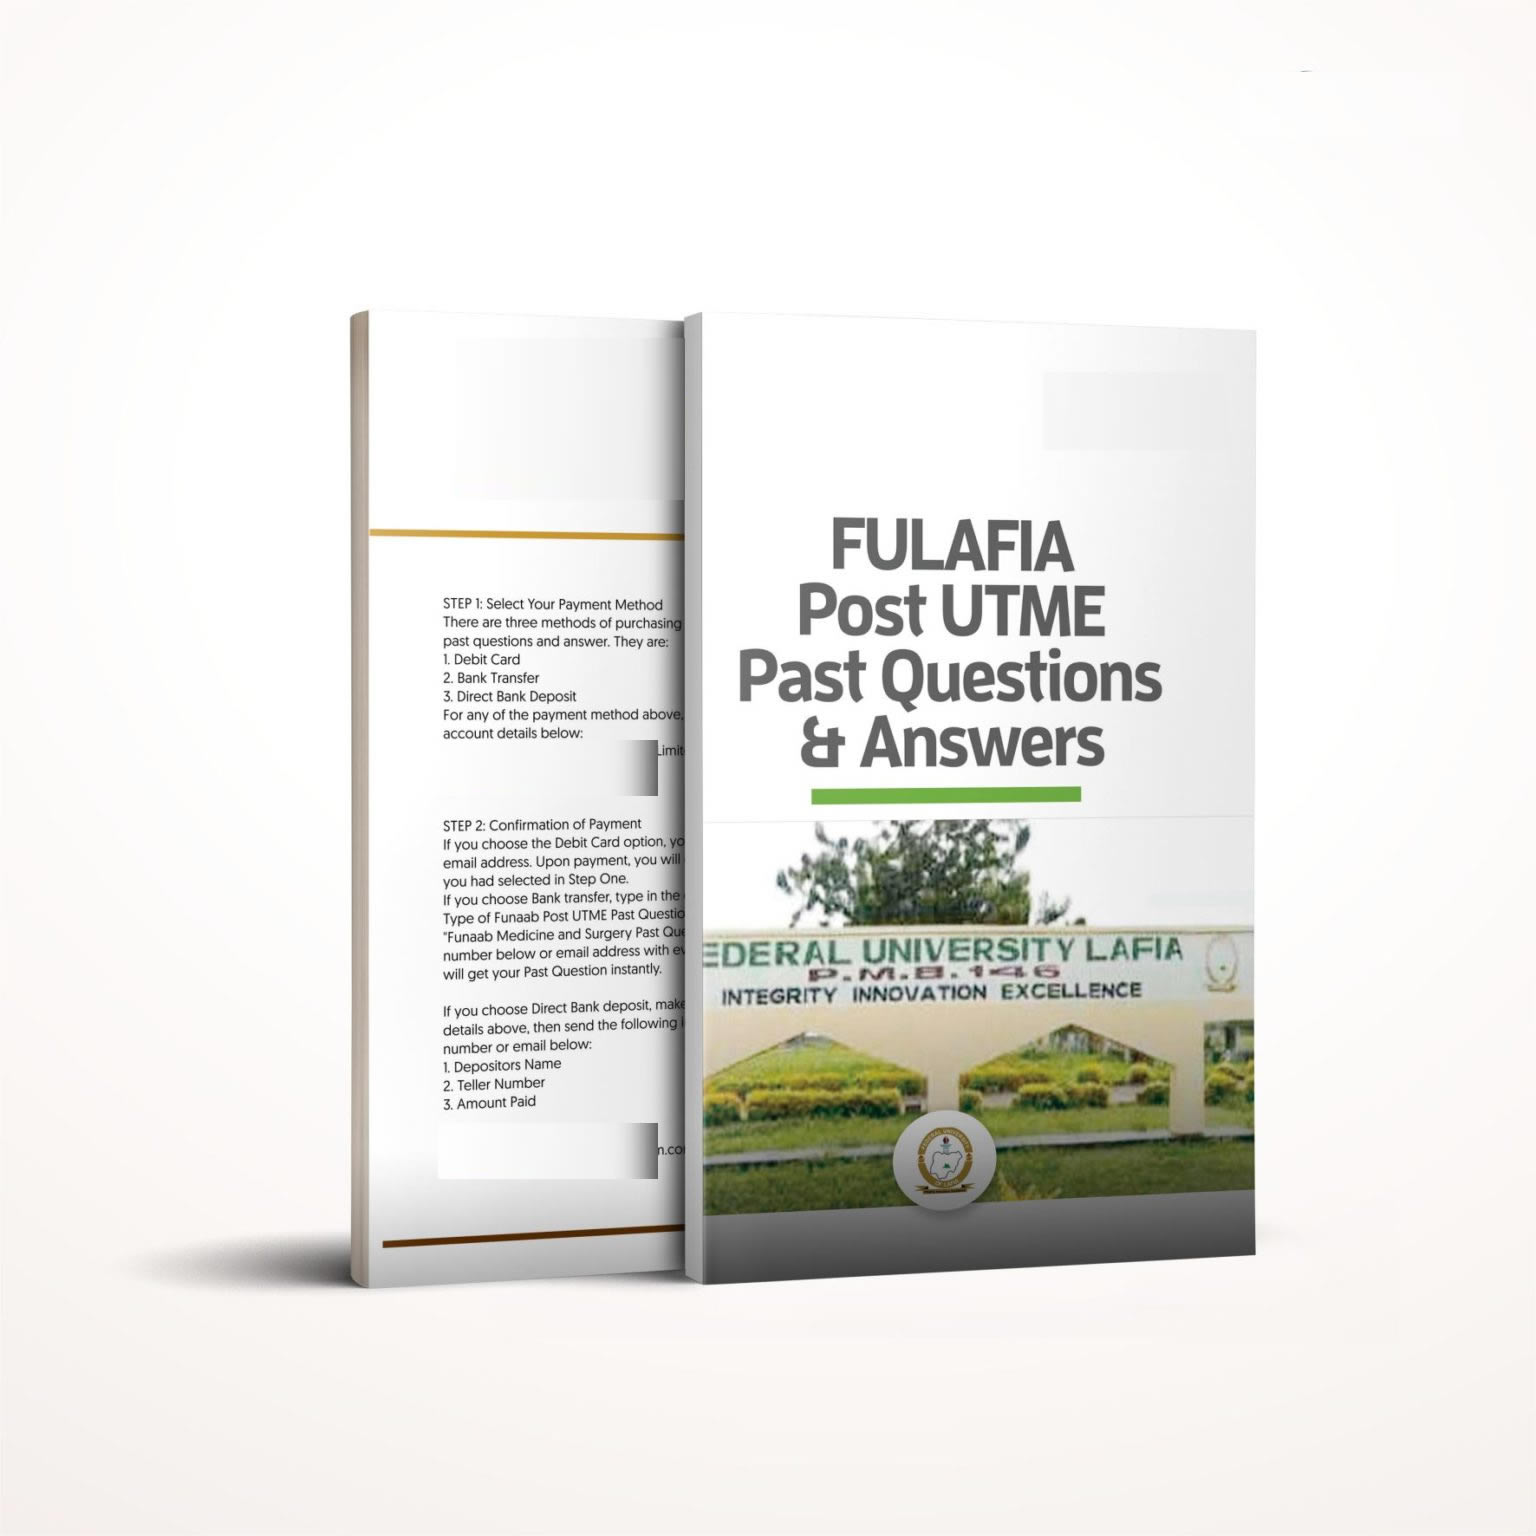 FULAFIA Post UTME past questions and answers